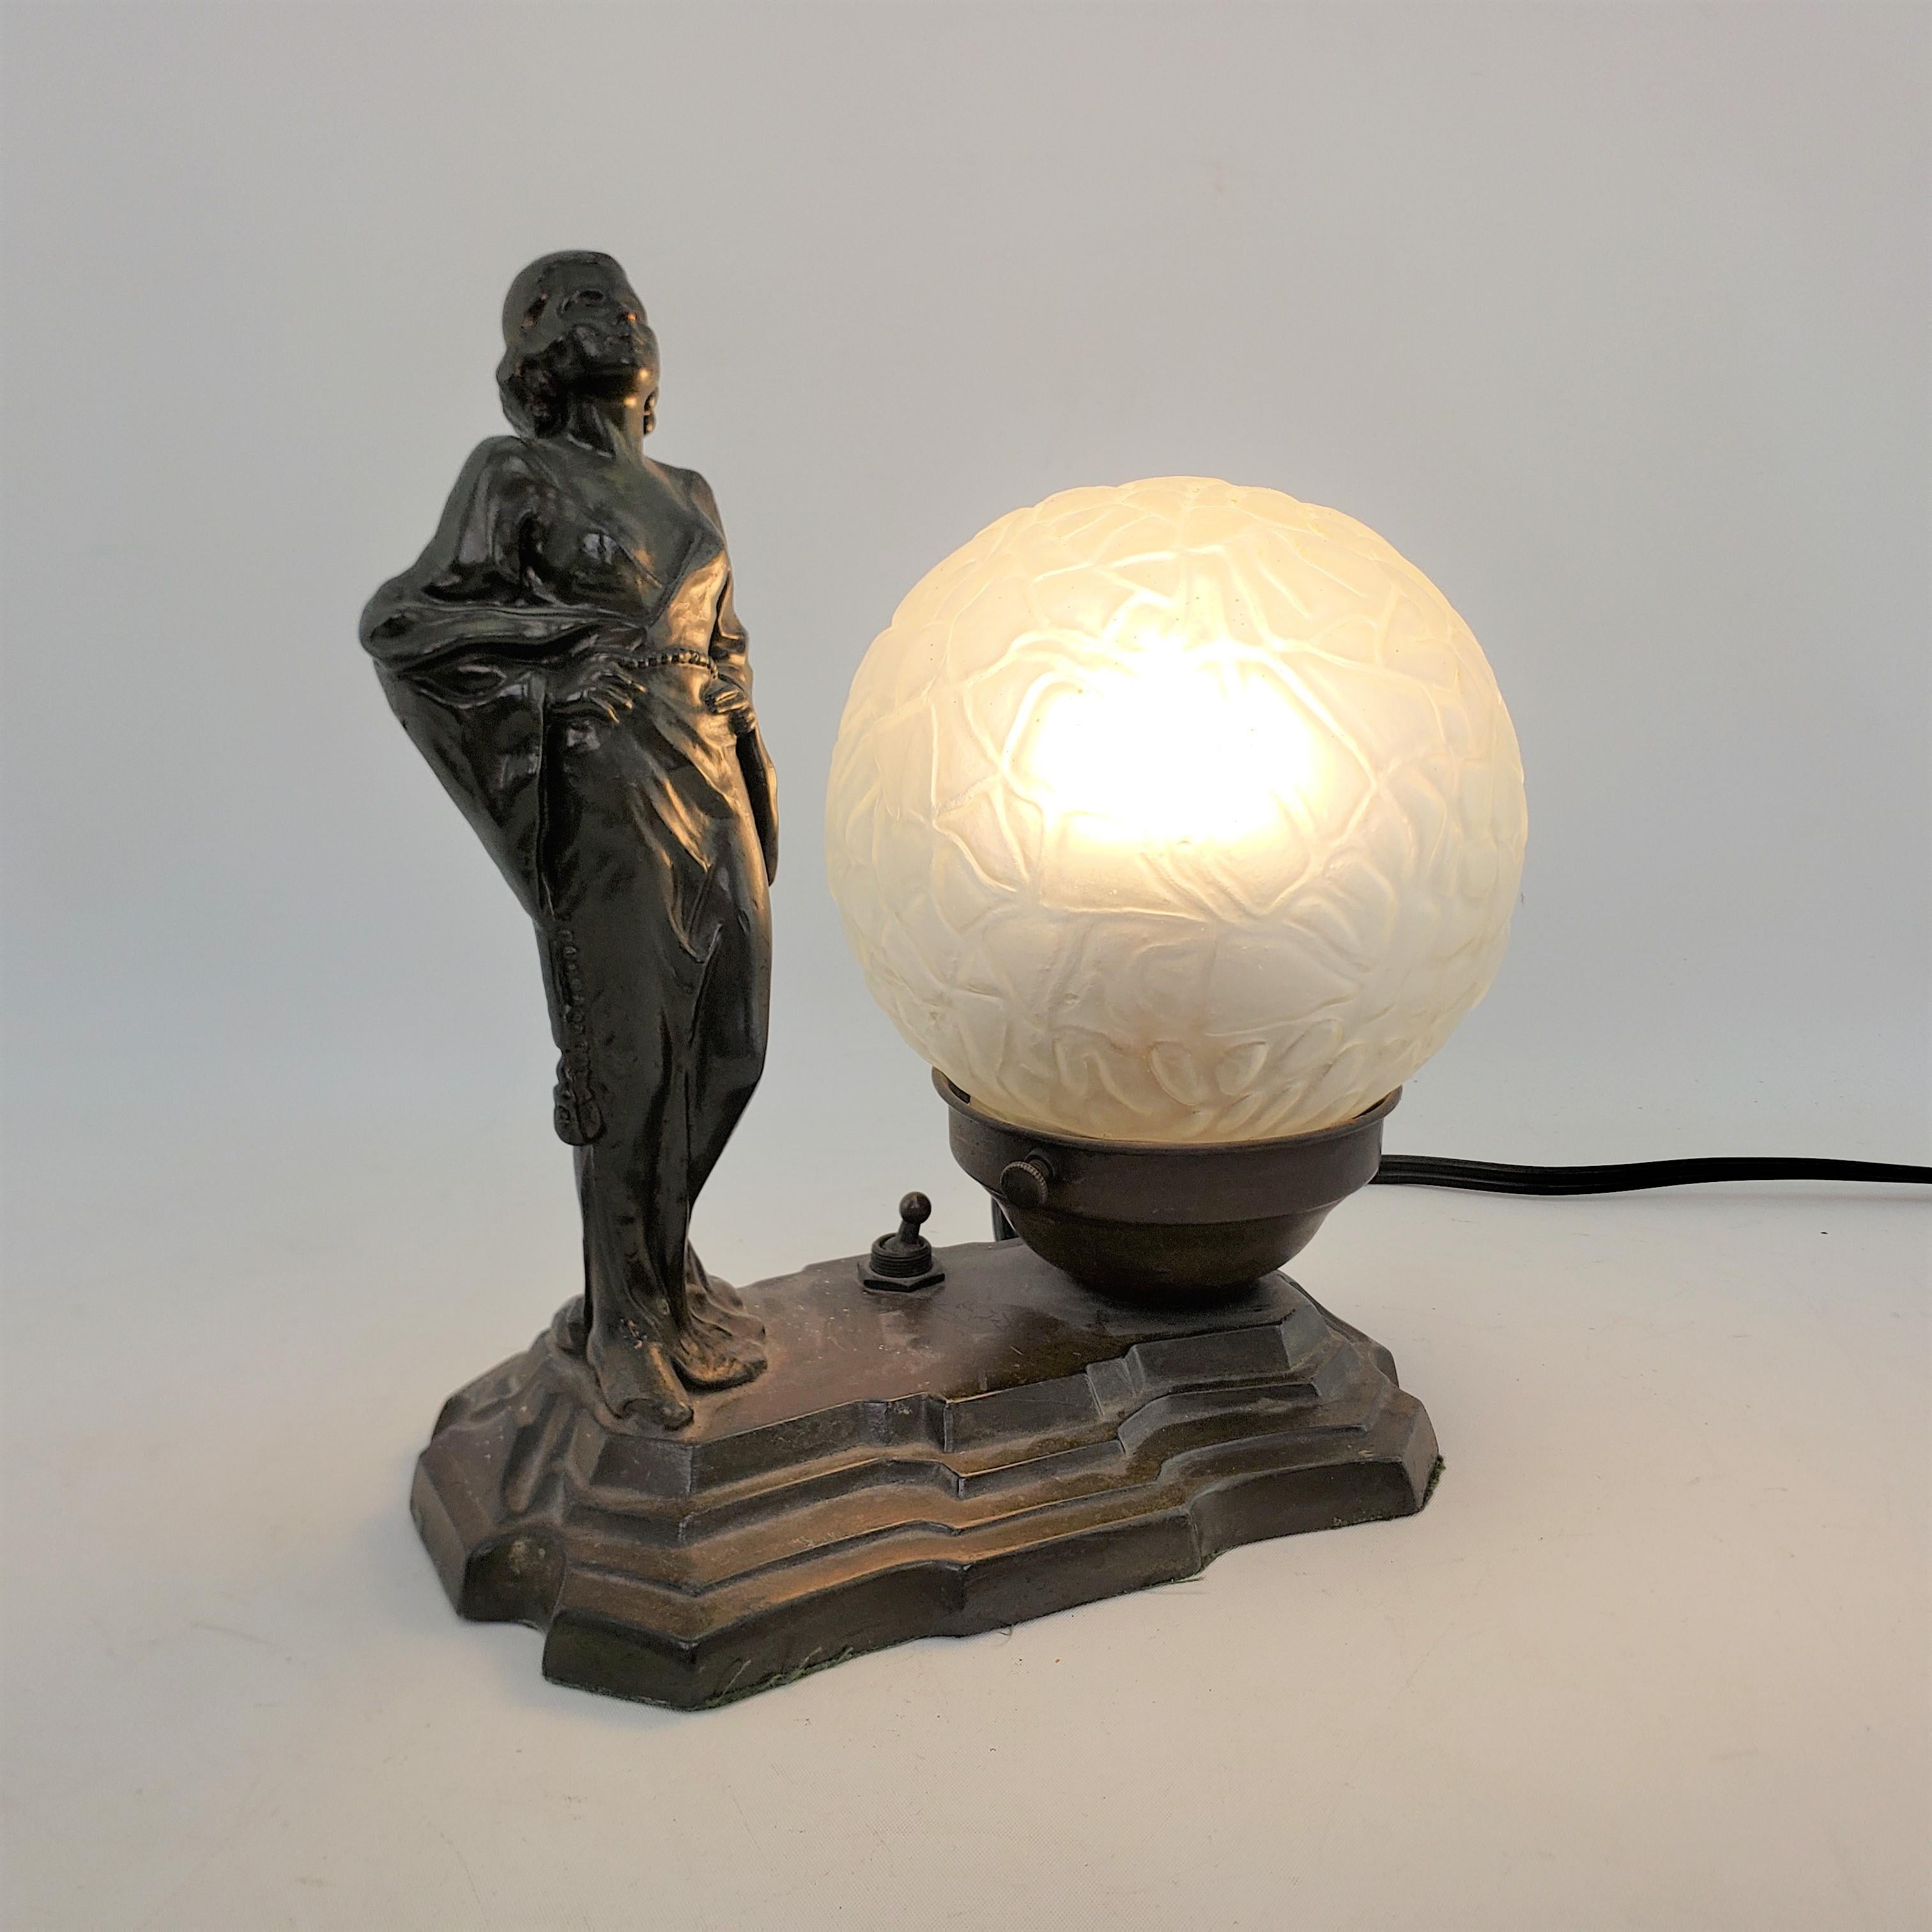 This antique table or accent lamp is unsigned, but presumed to have originated from the United States and date to approximately 1920 and done in the period Art Deco style. The lamp is composed of a cast spelter with a bronze patination and depicts a